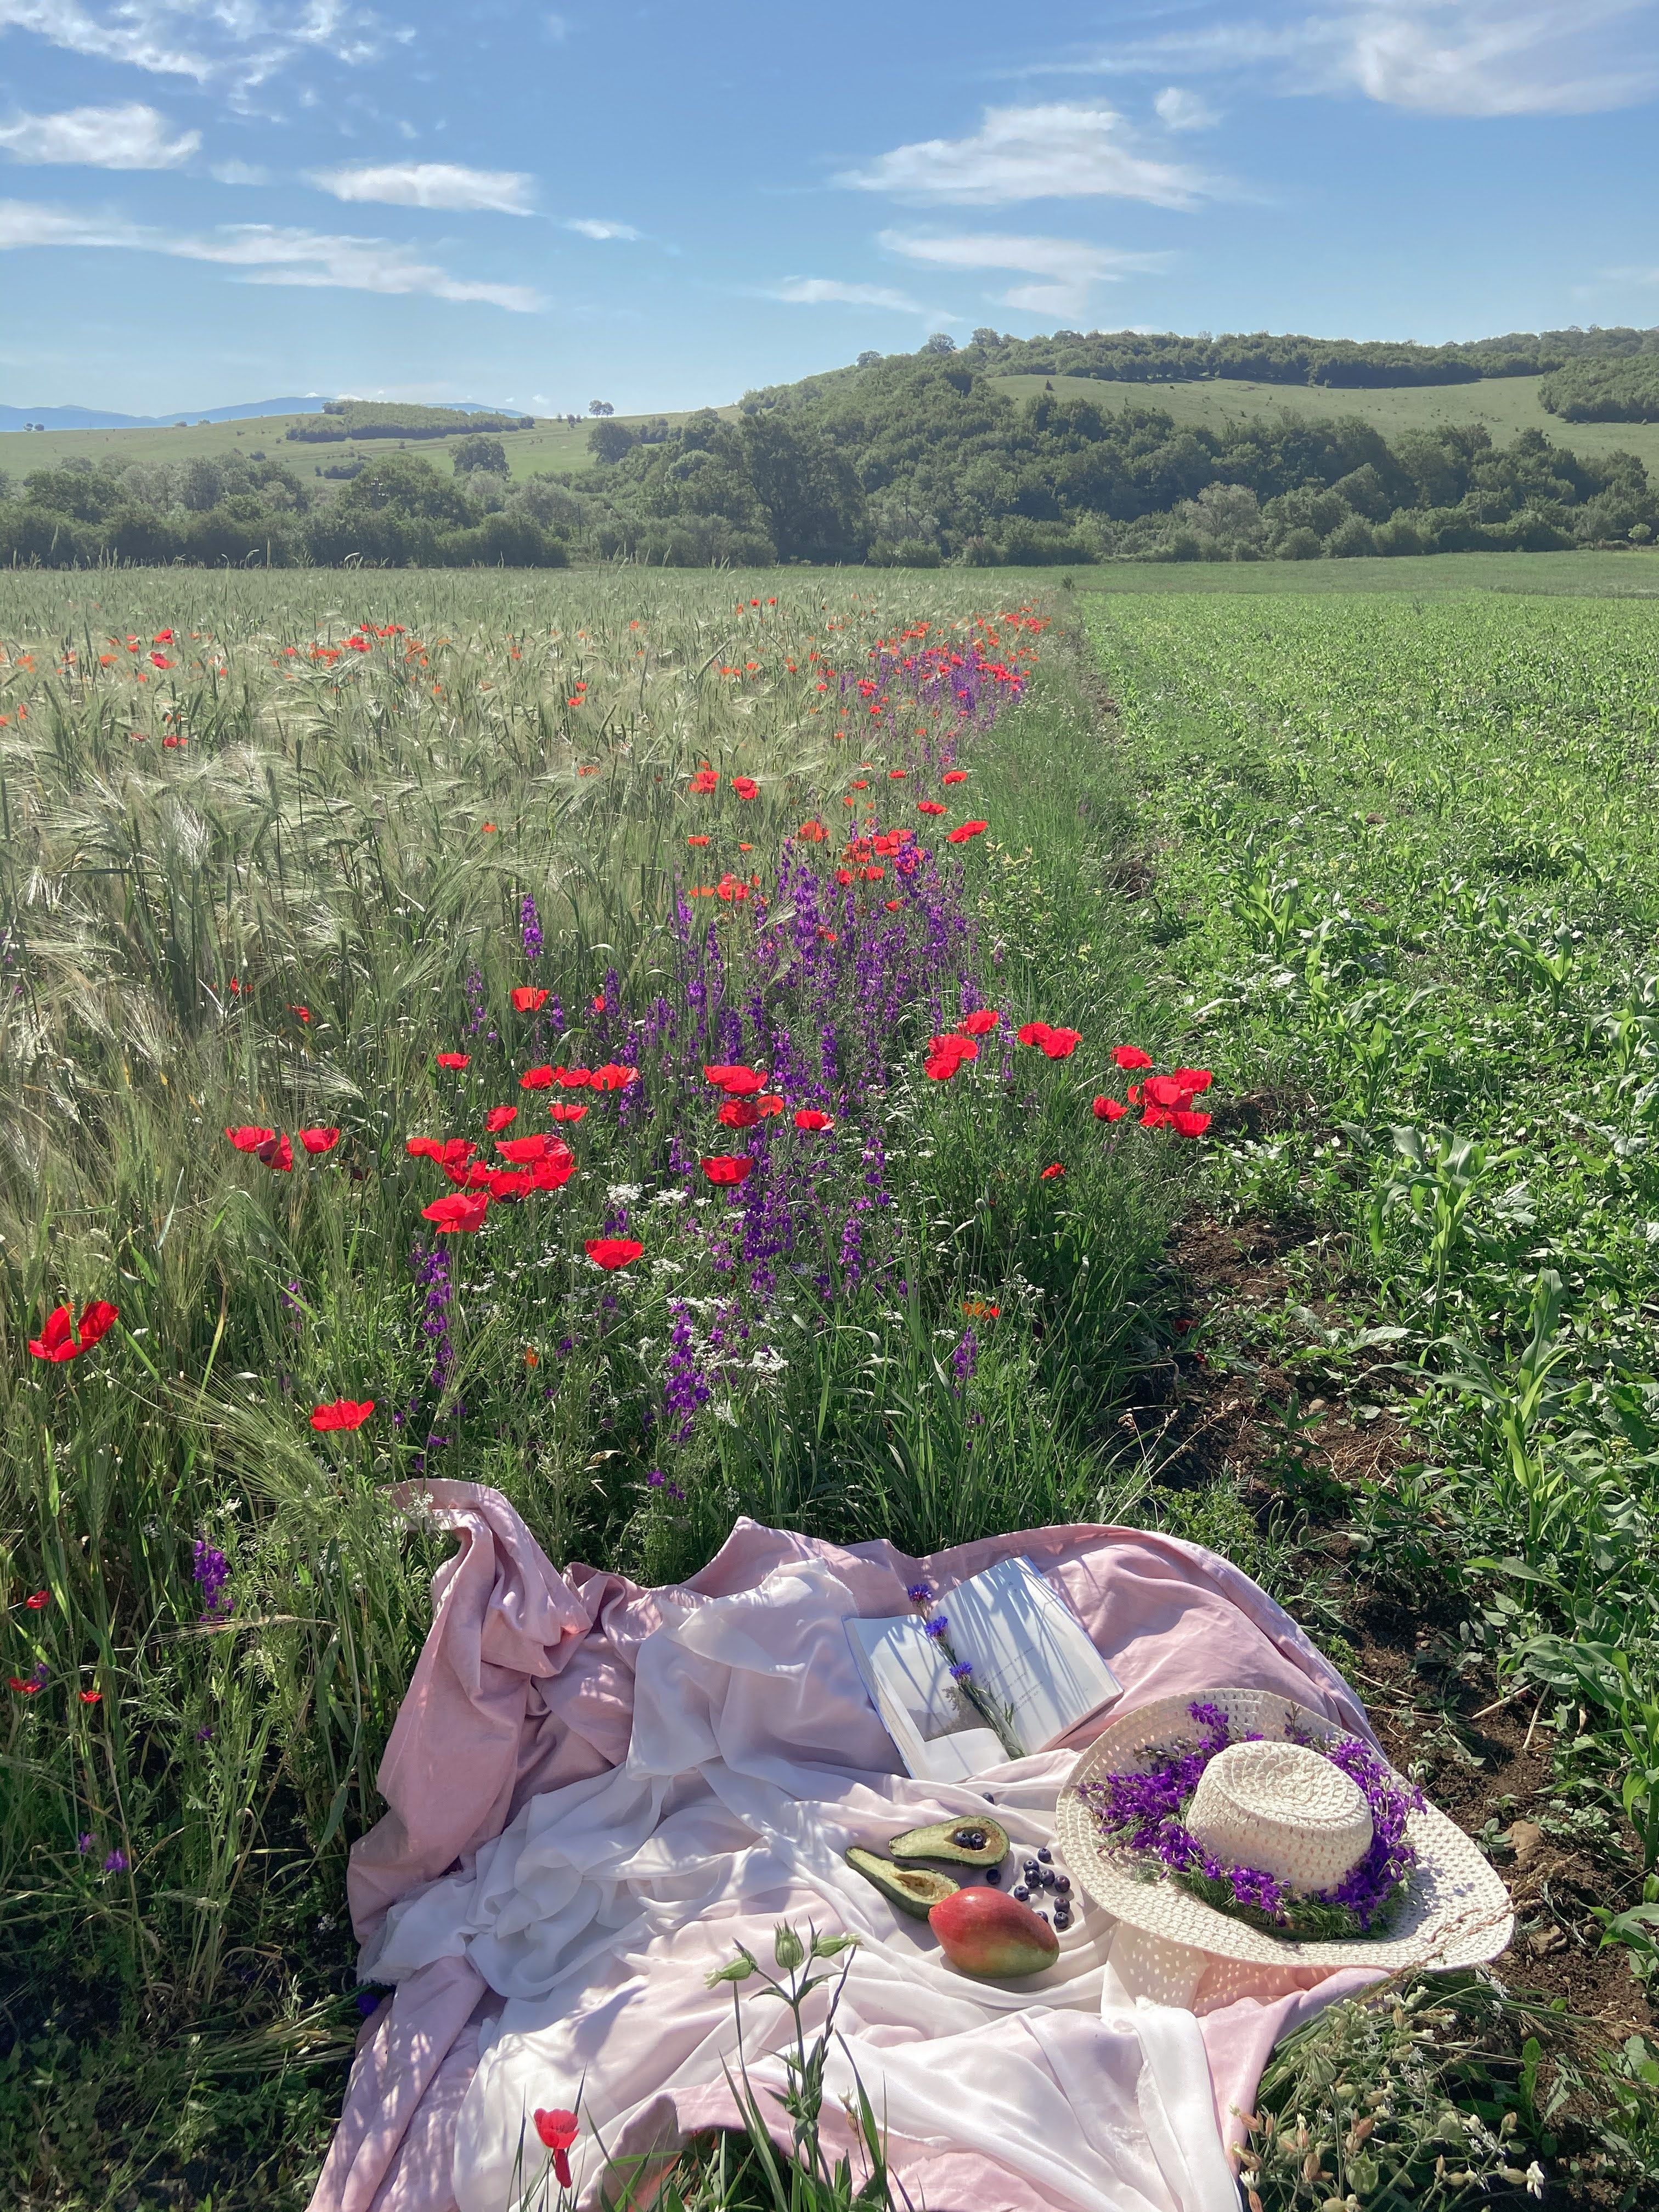 A field of red and purple flowers with a blanket and hat on top. - Farm